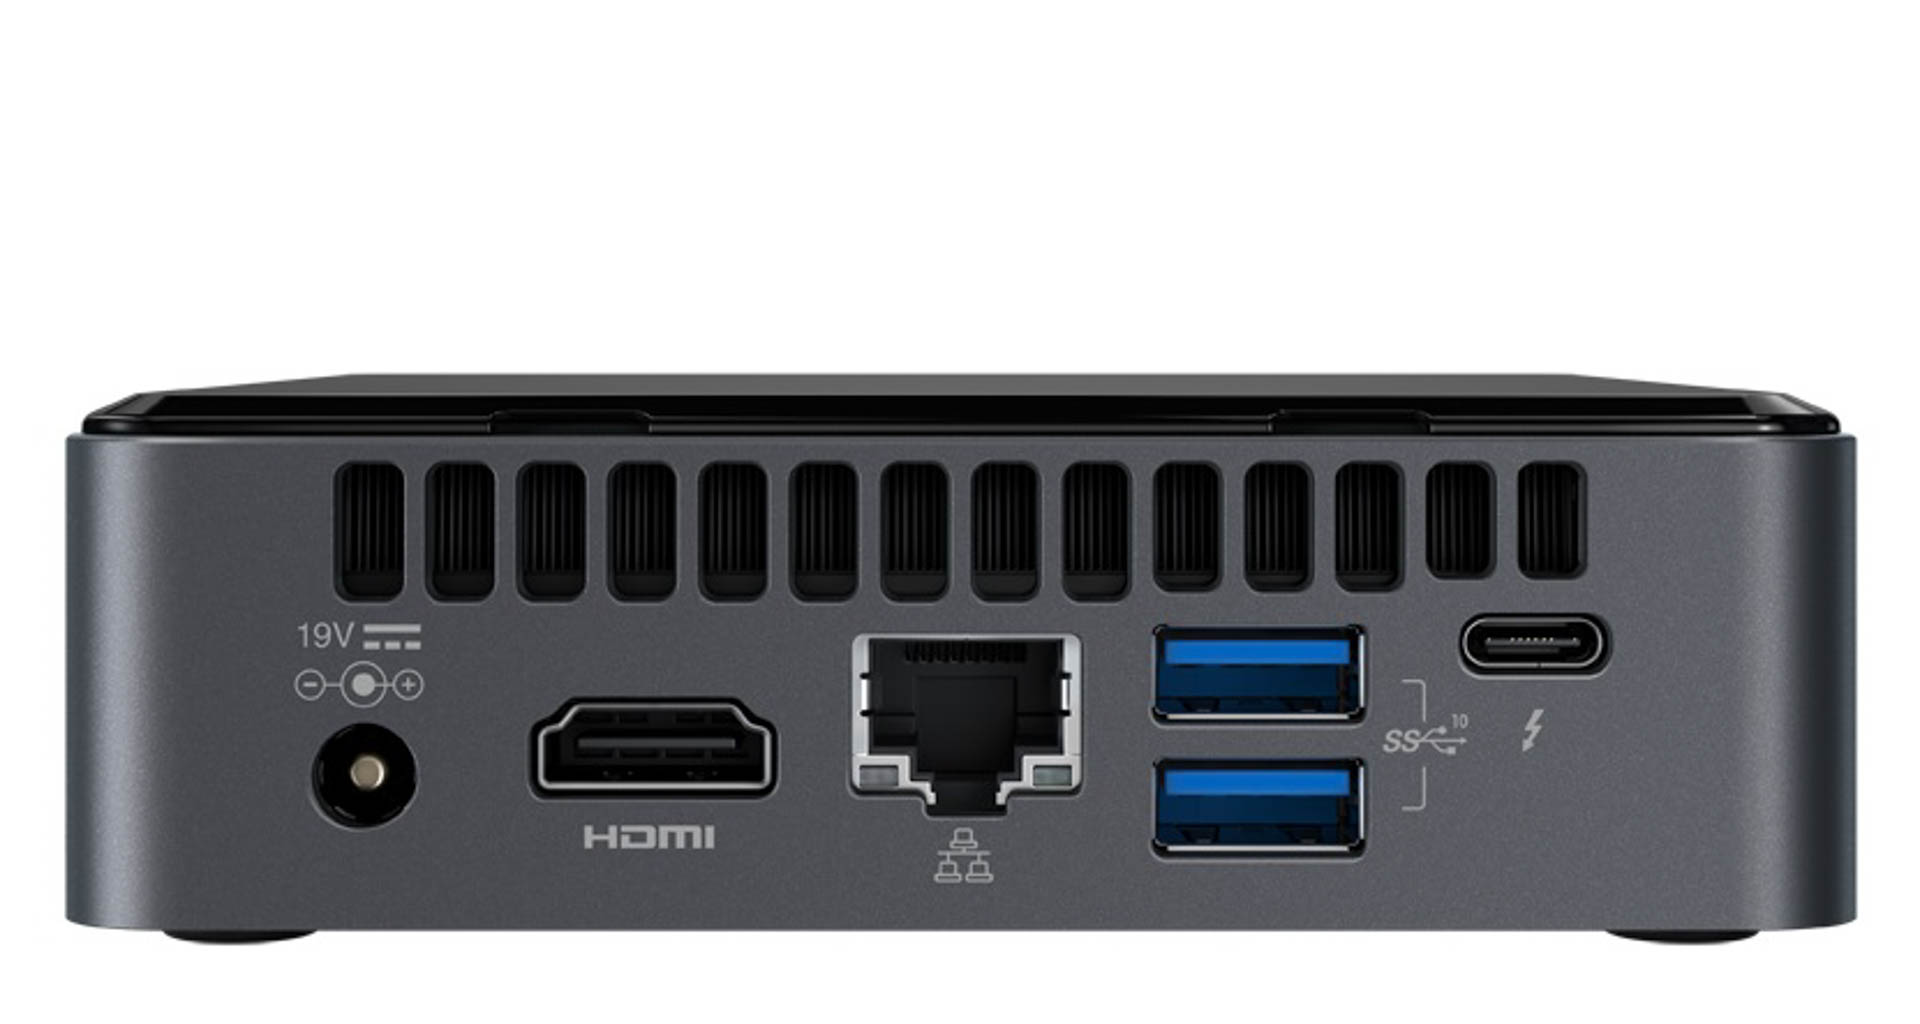 Intel offers NUC kits to that can be customized with a choice of storage, memory, and operating system. Image: Intel Corp.